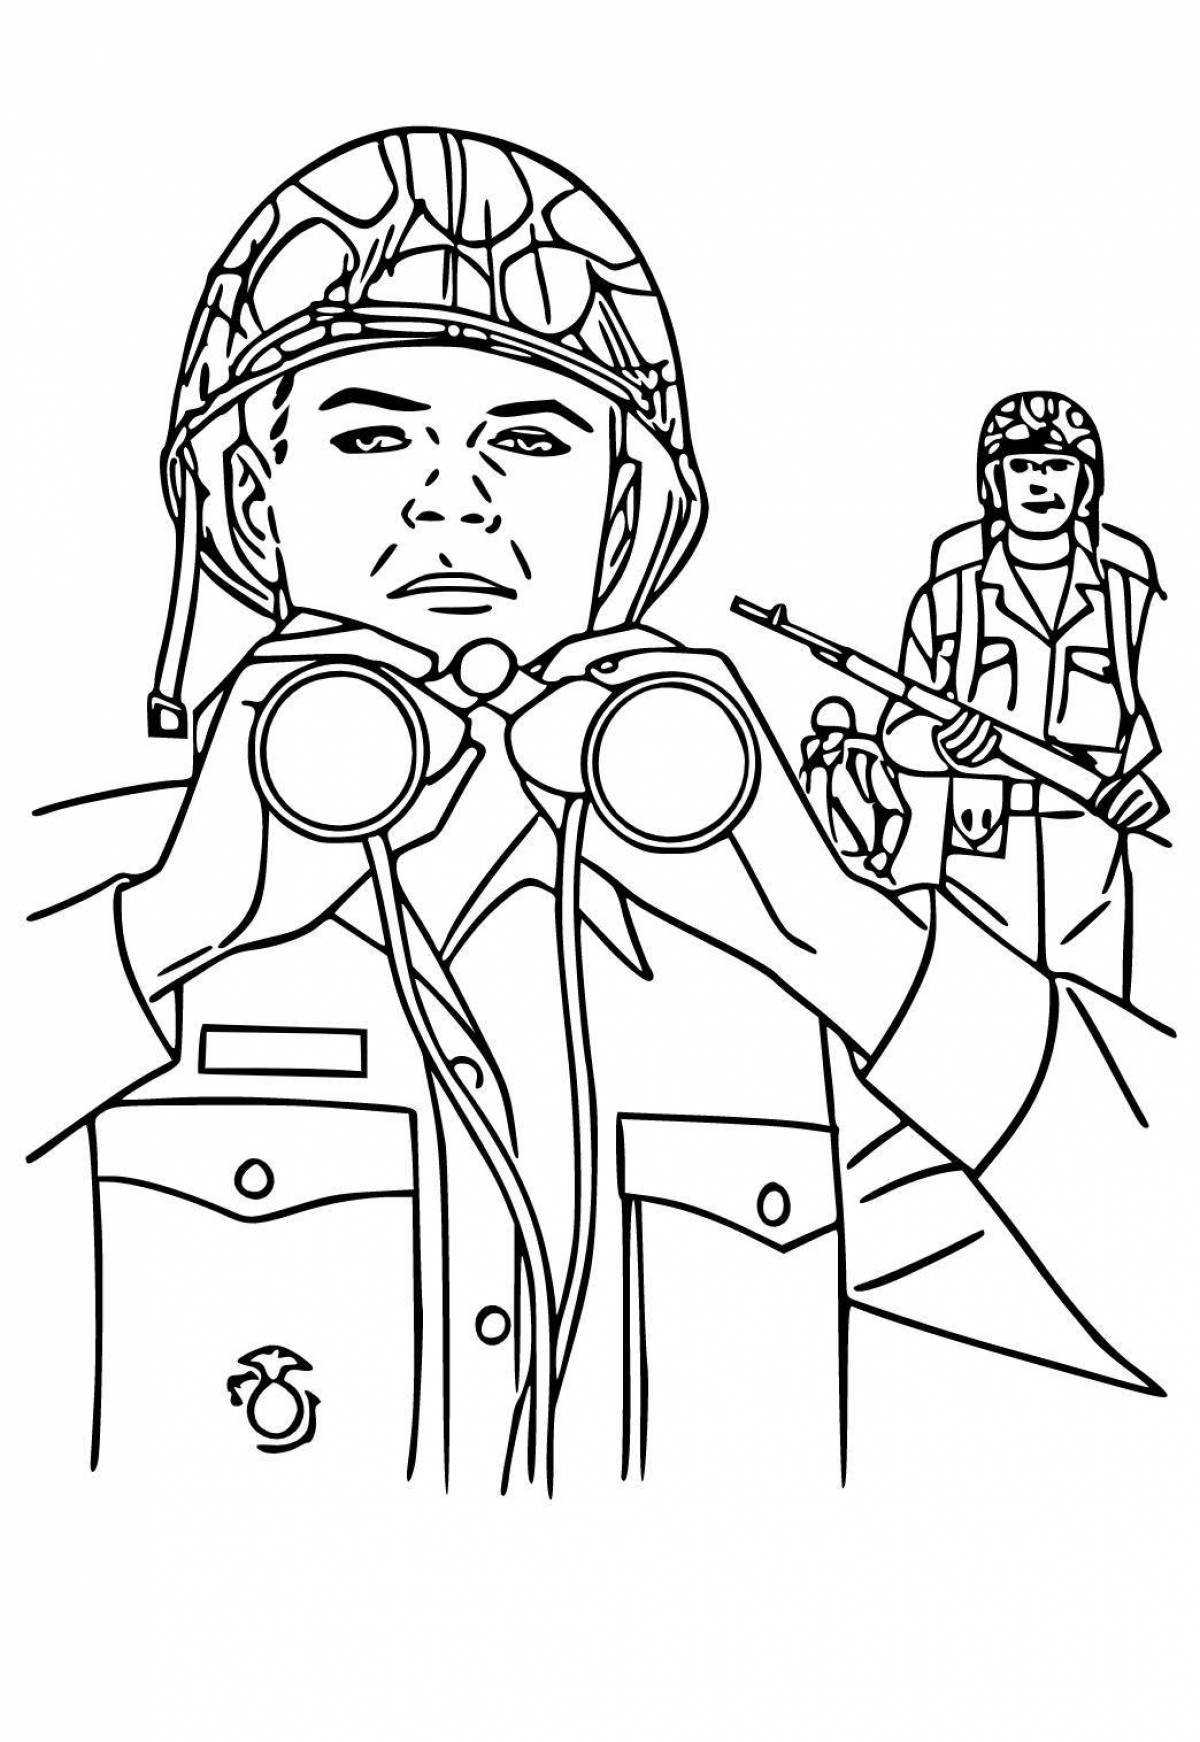 Exquisite military profession coloring book for kids